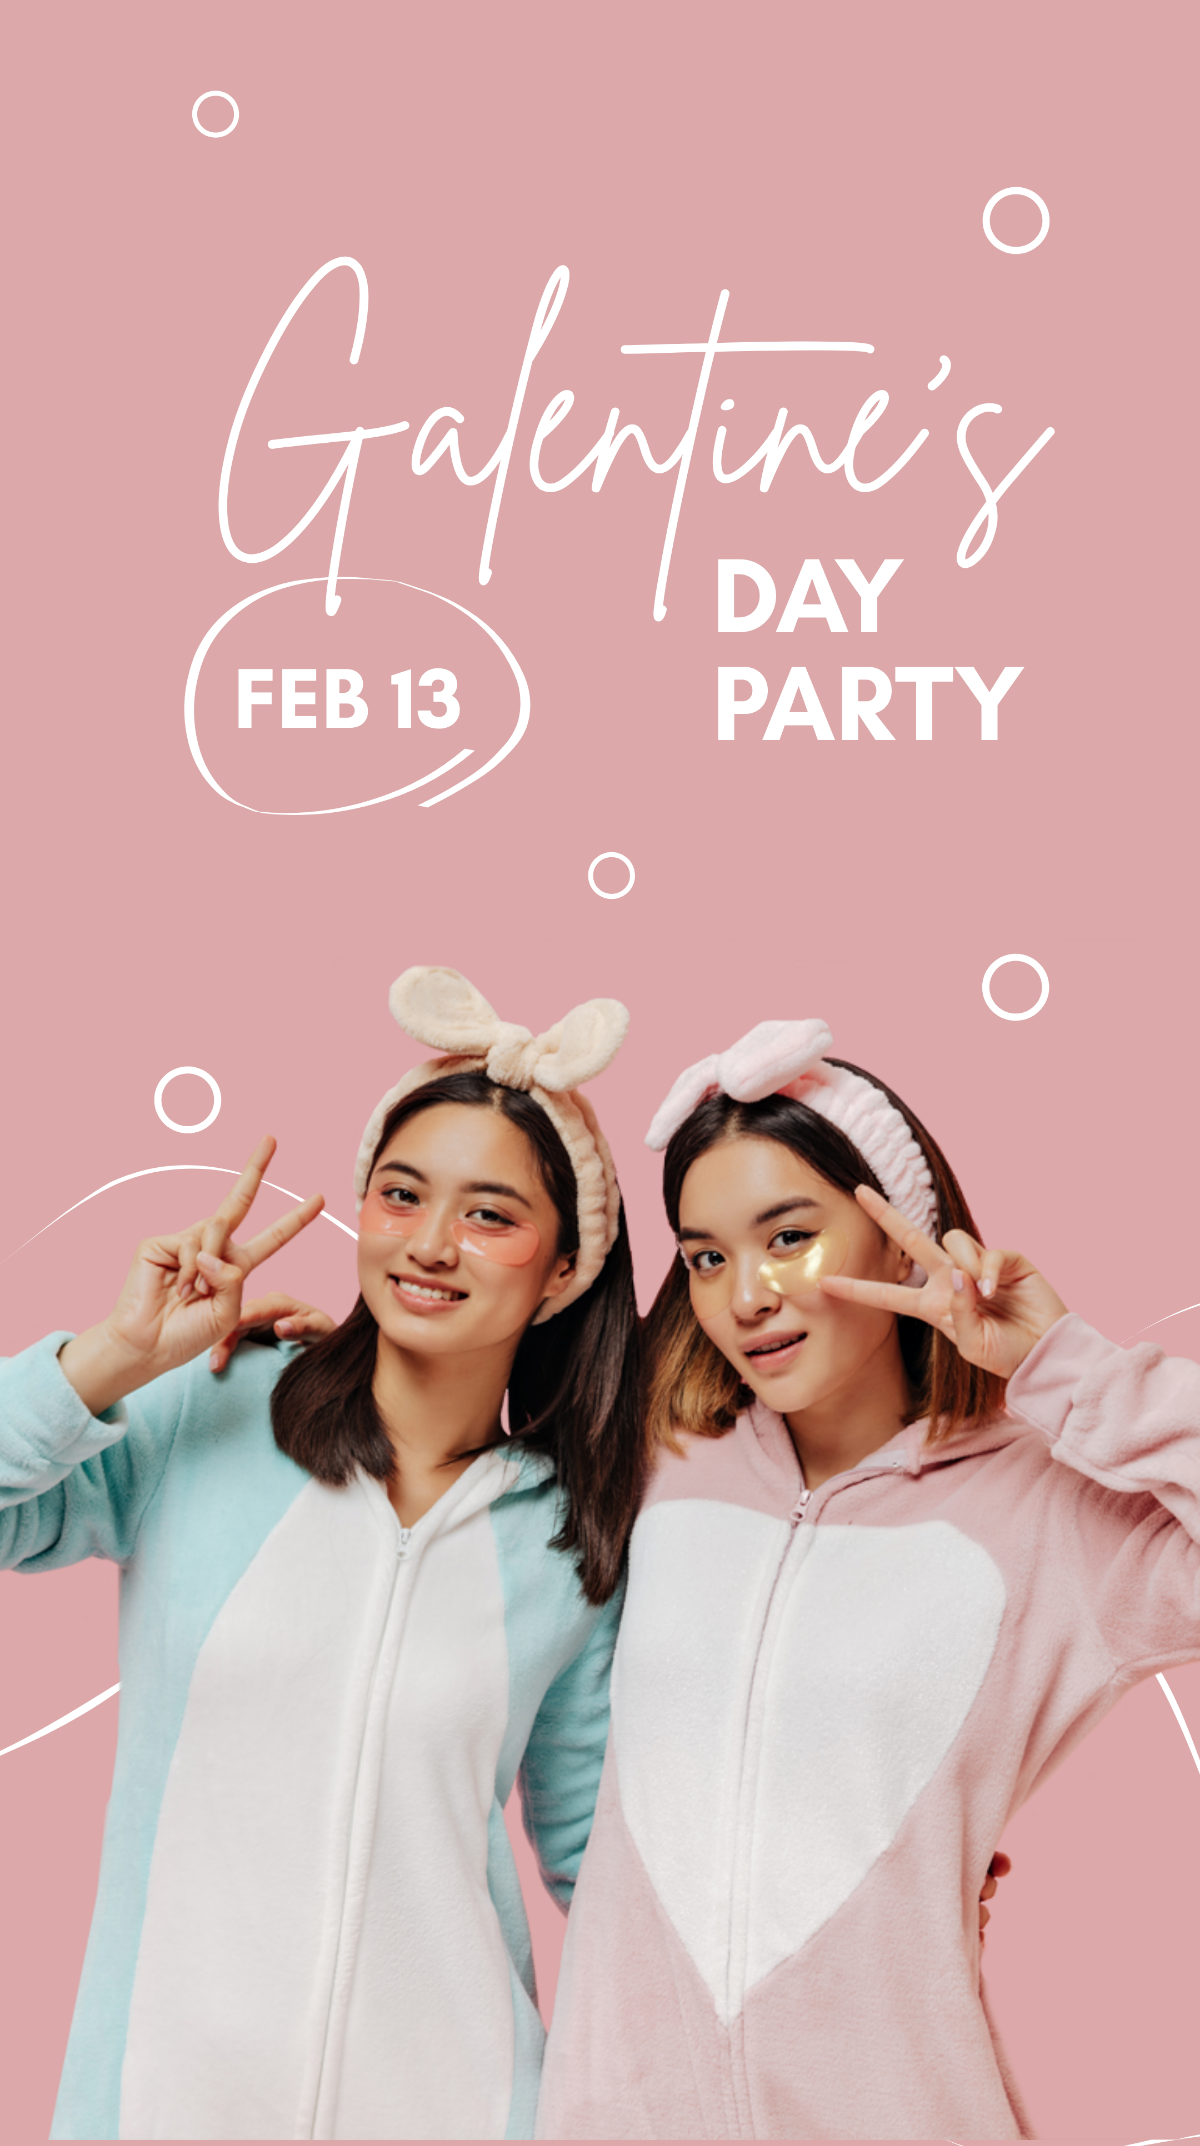 Galentines Day Party Instagram Story Template